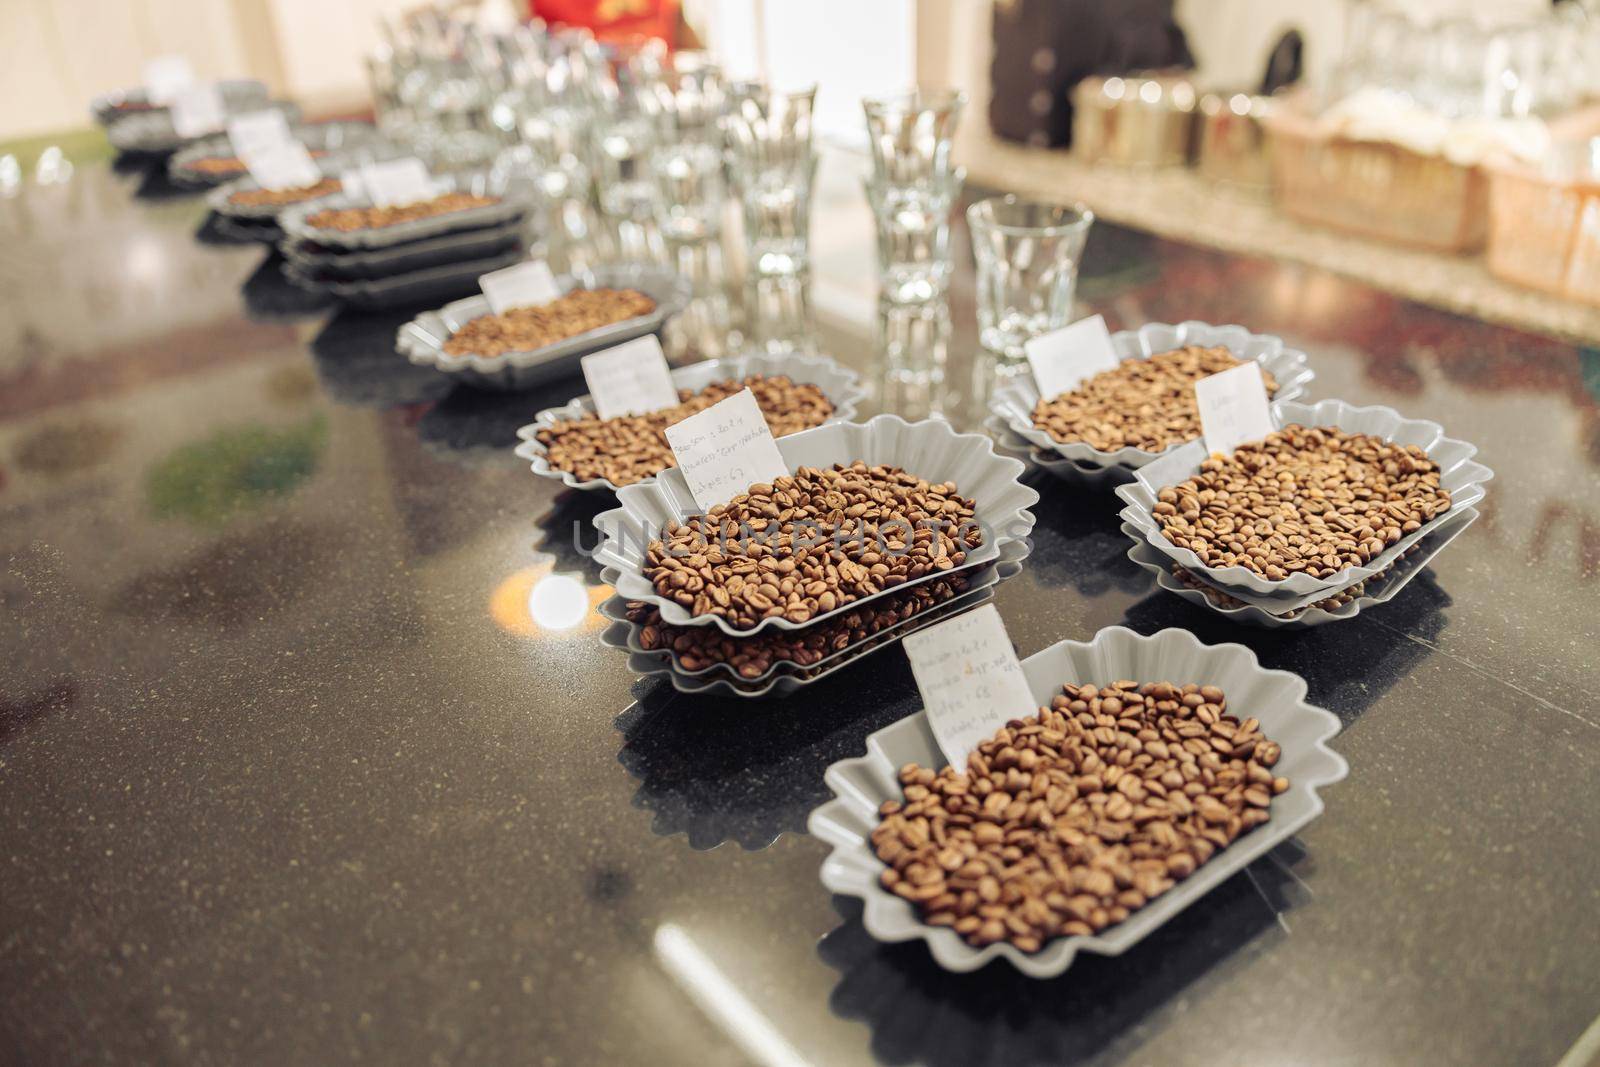 Different varieties of coffee beans in plastic bowls and notes for tasting